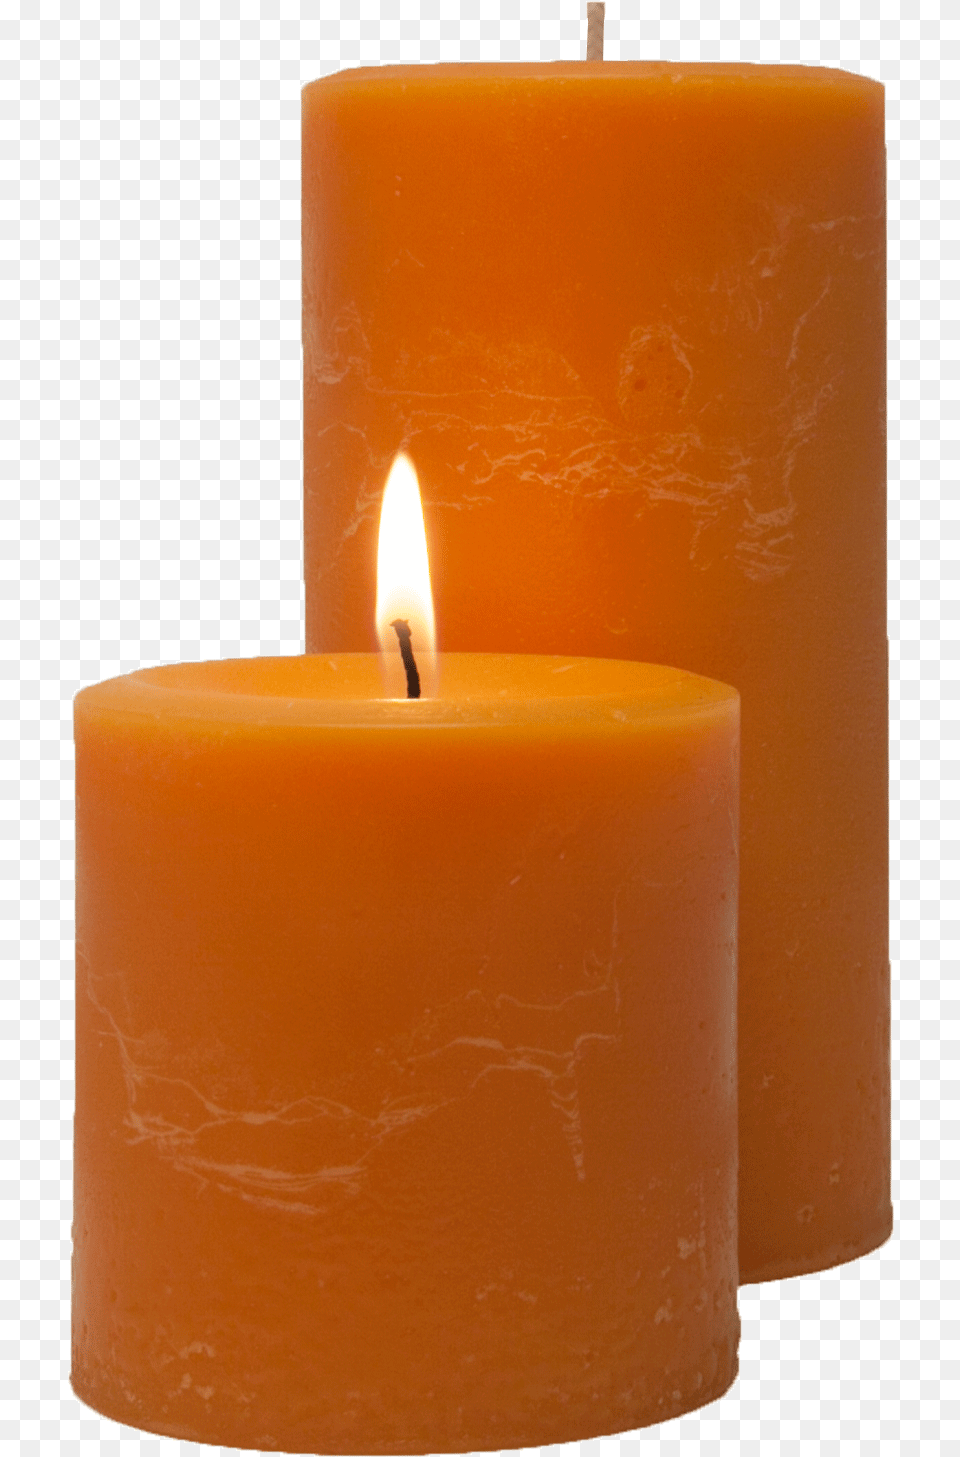 Double Fragrance Peach Nectar Pillar Candlesclass Advent Candle Free Transparent Png